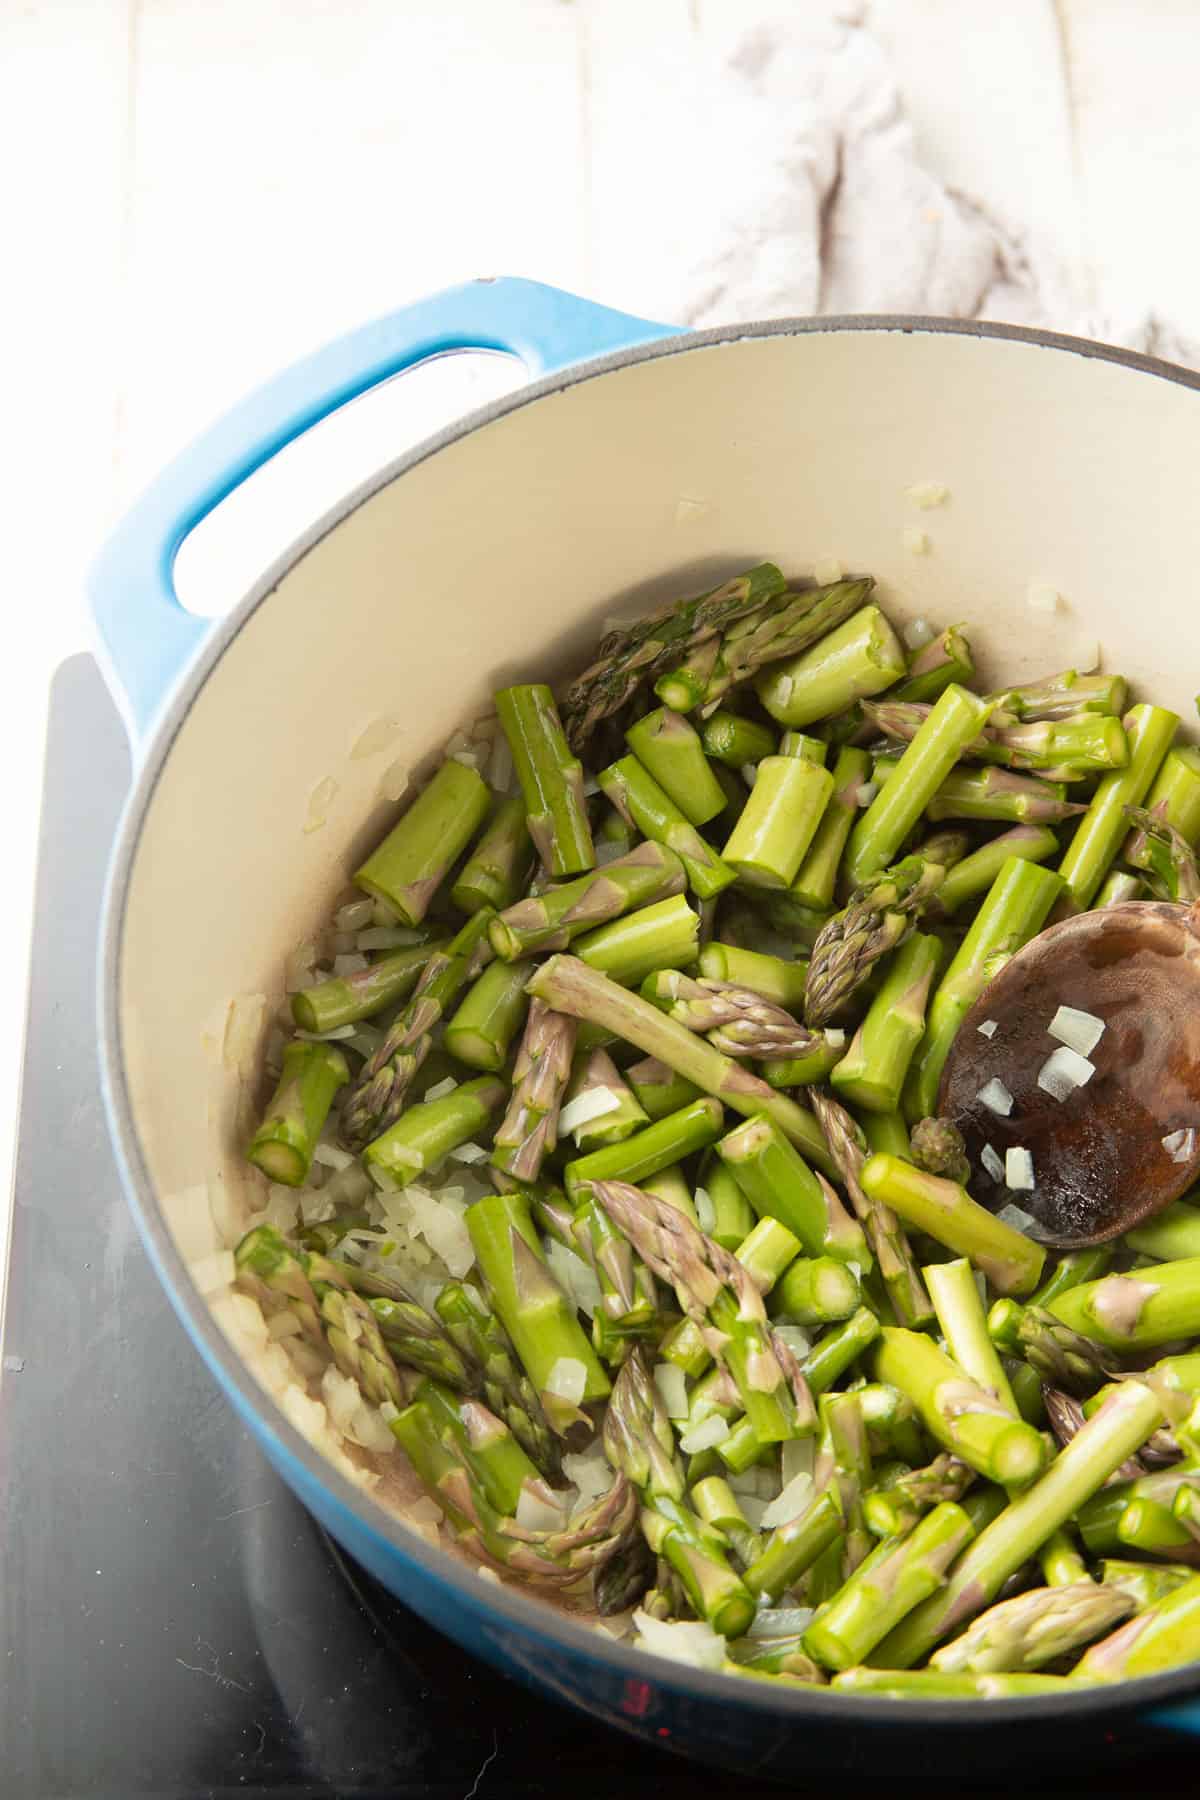 Asparagus pieces and onion cooking in a pot.